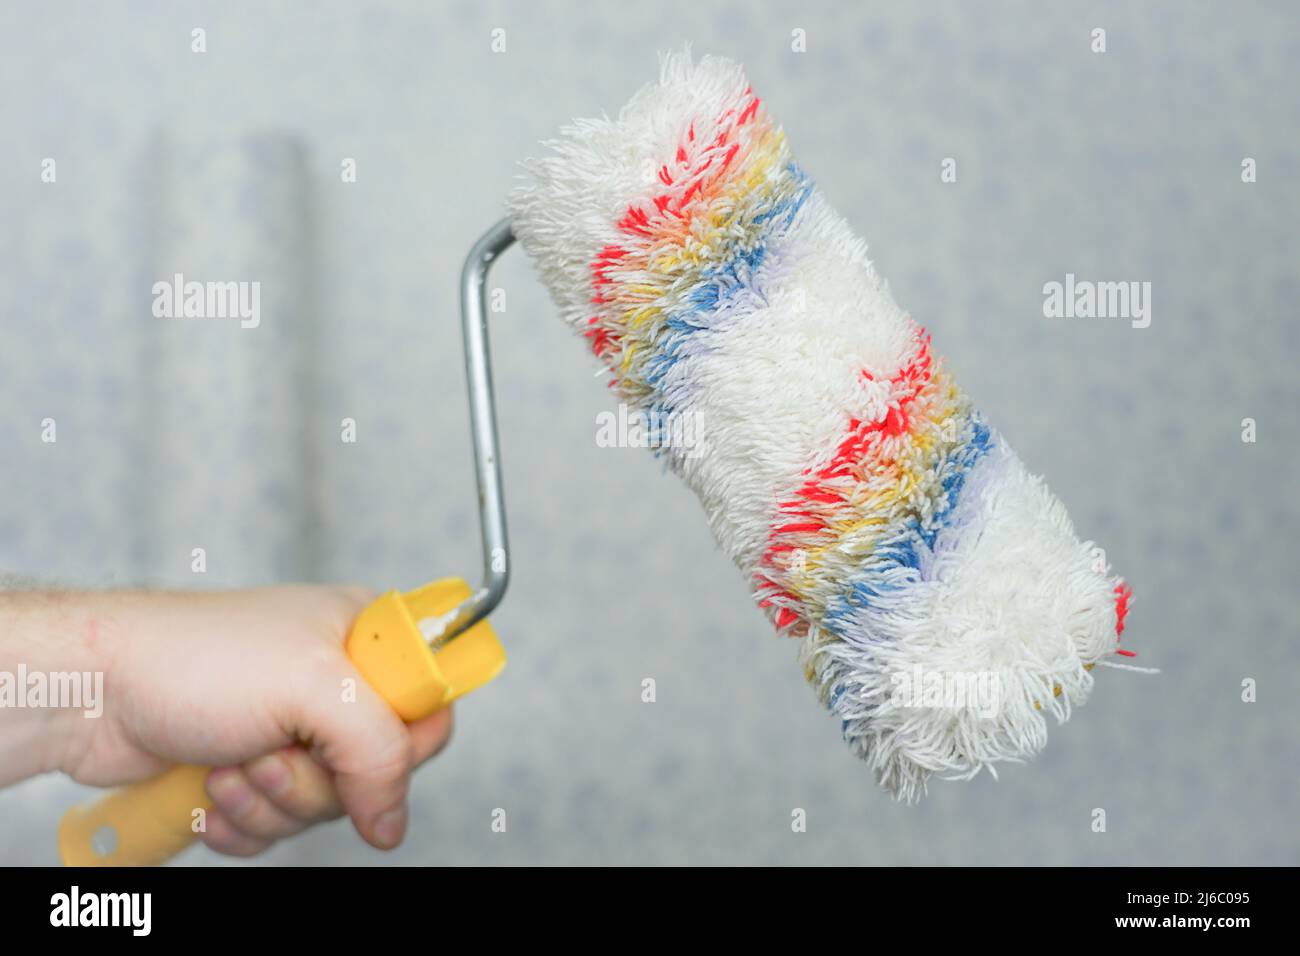 Hand holds a roller for painting the walls. Soft roller for wallpapering and textured application Stock Photo